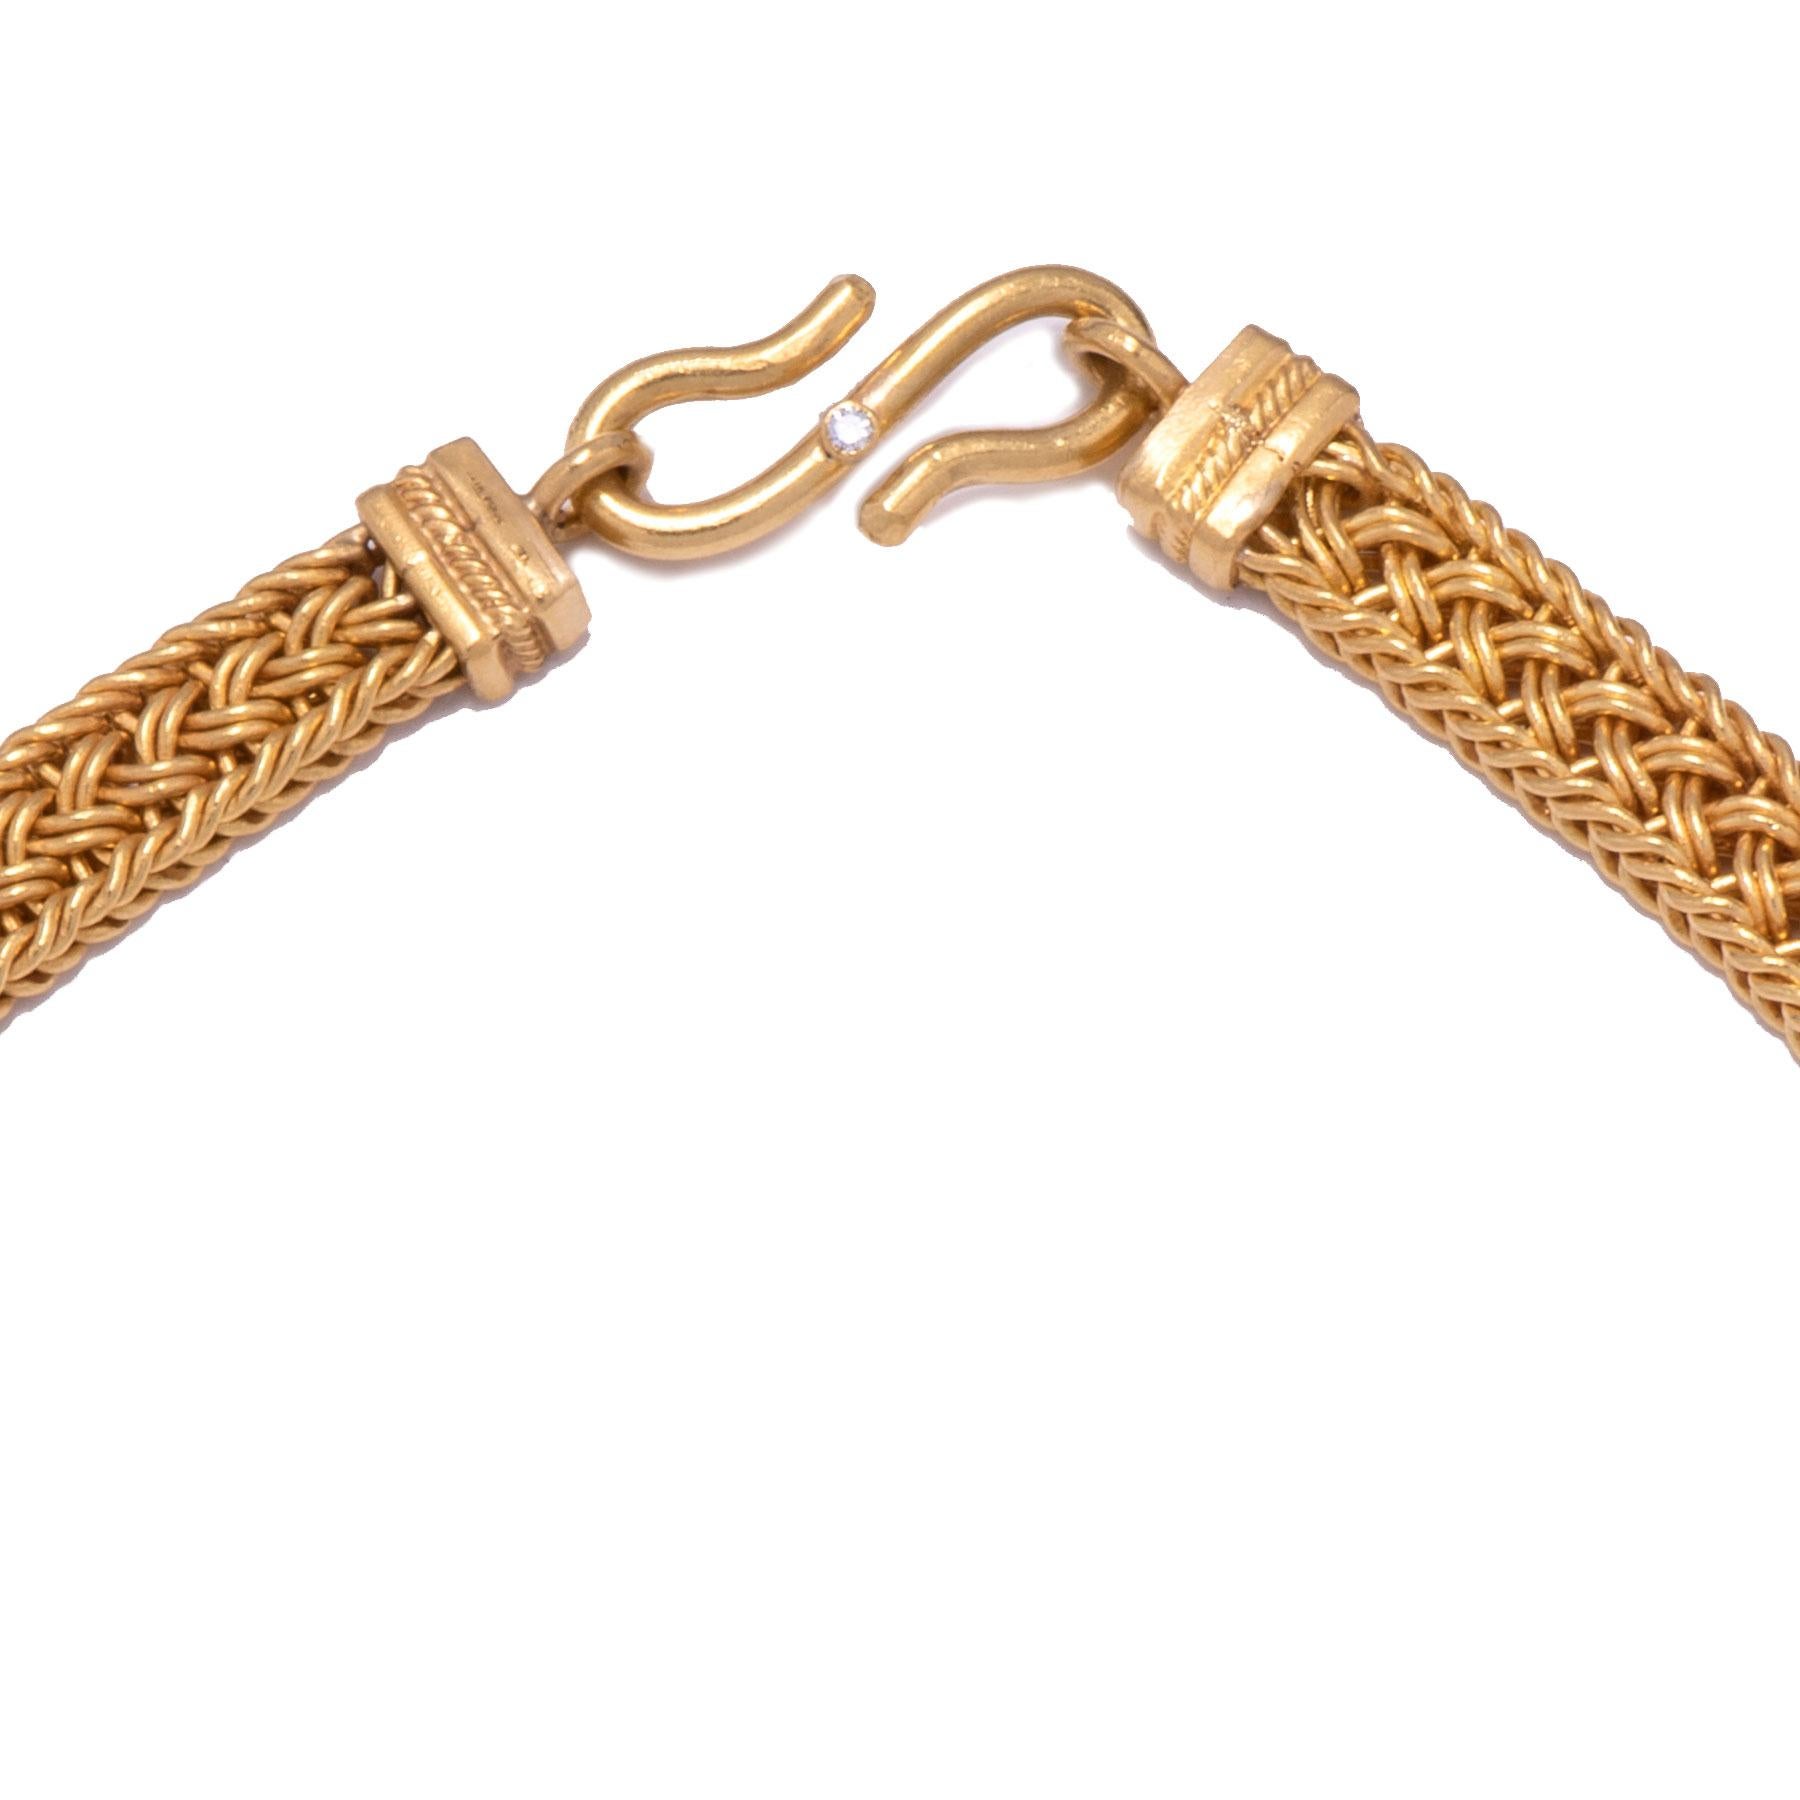 Handwoven of 22k gold by Keith Berge, this necklace is fitted with a hand crafted S clasp in 22k gold set with a white diamond. At 17